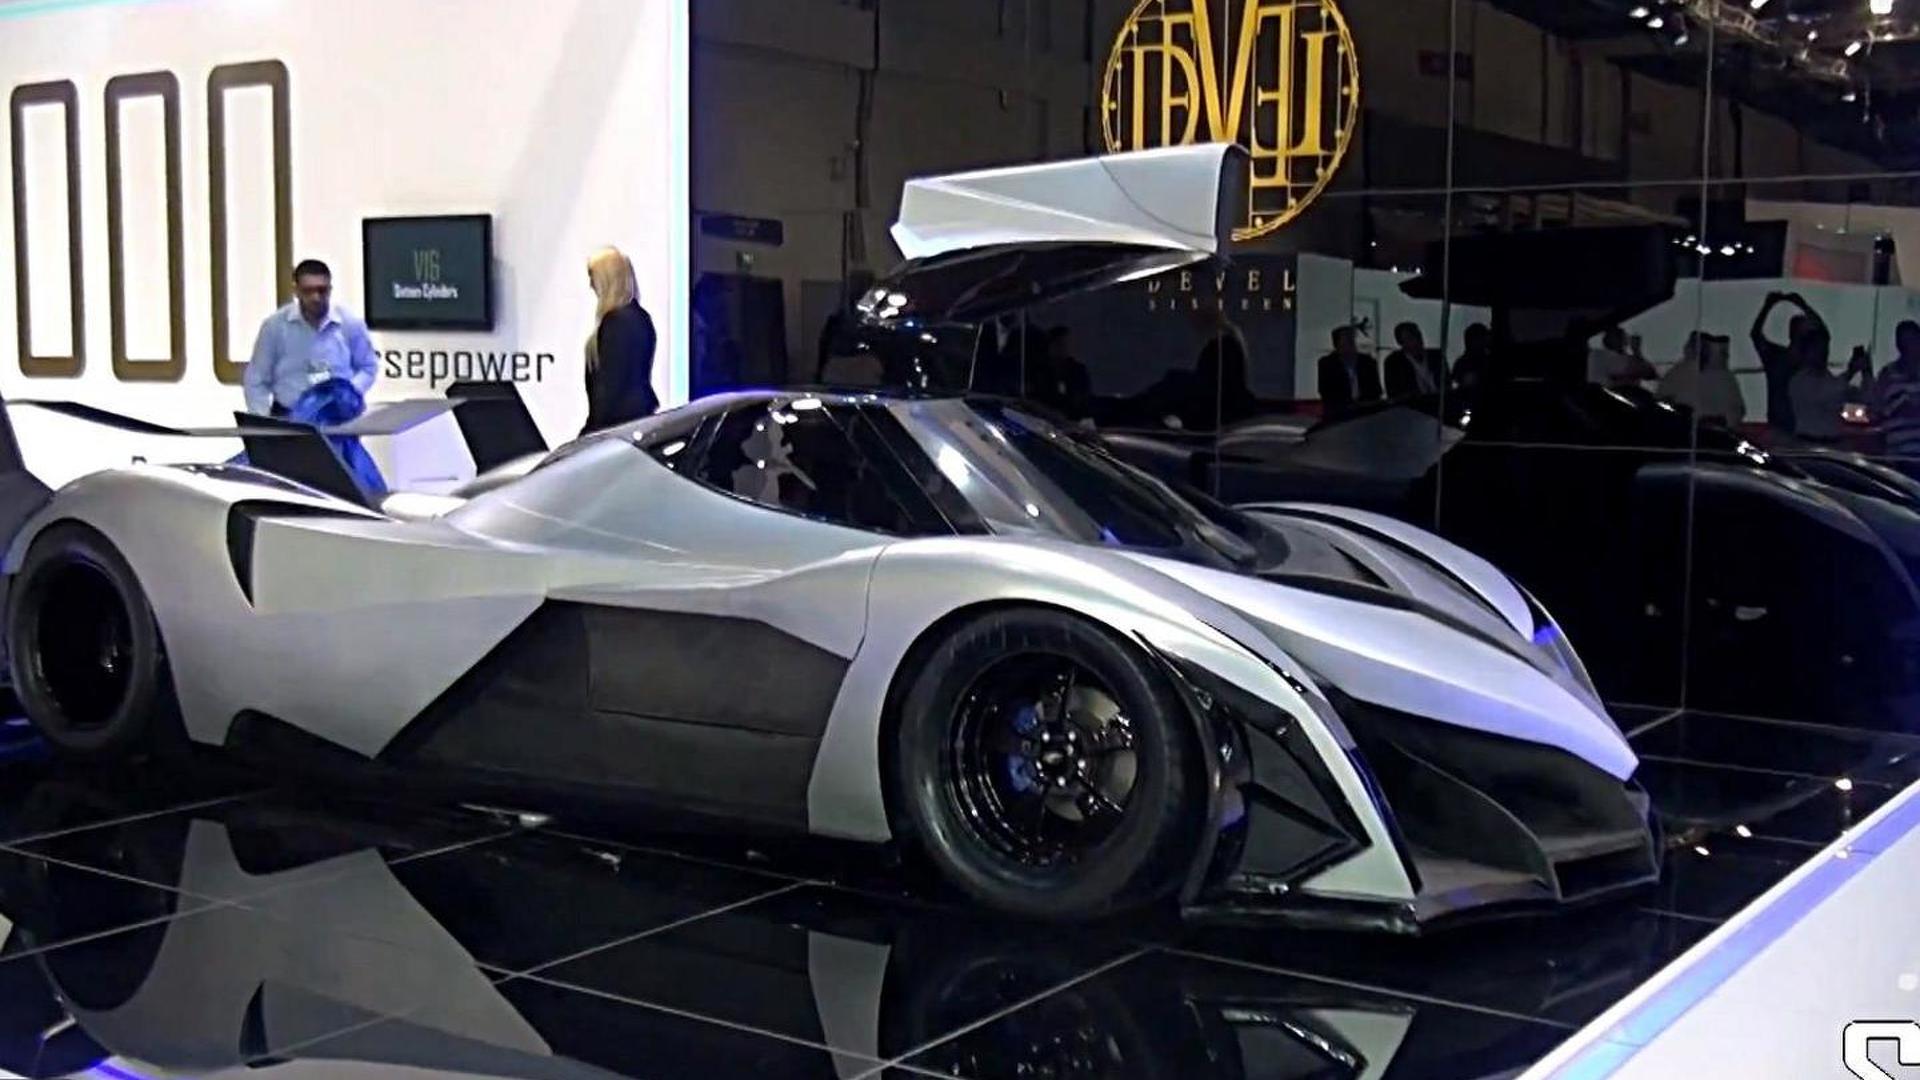 Short clip with the Devel Sixteen in motion, sounds fierce